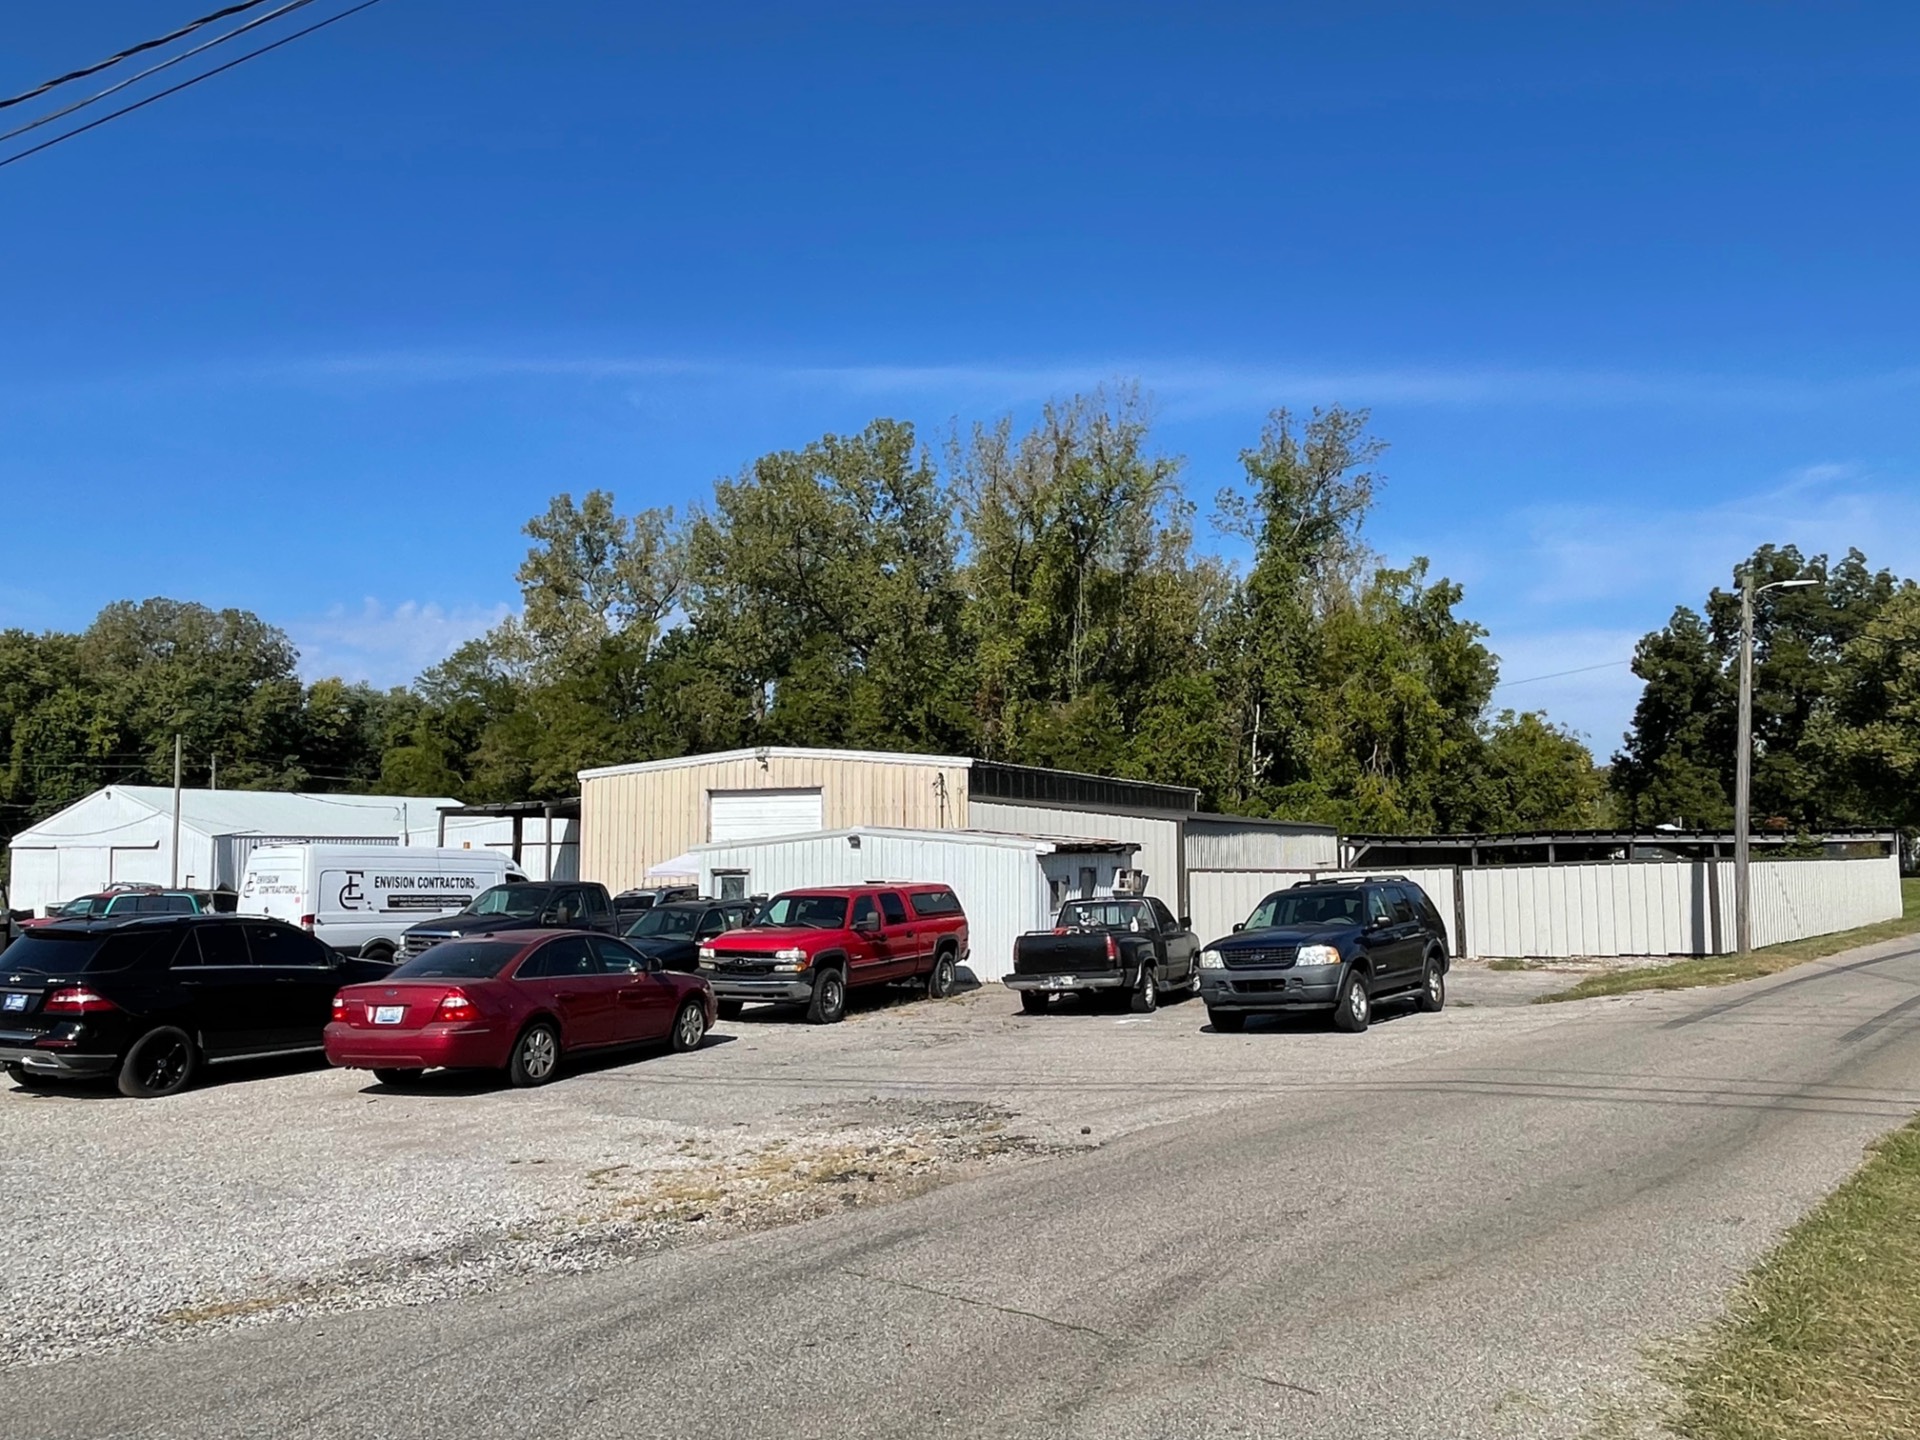 Over 8,000 SF of Industrial Build Space on 2.3 Acre Site